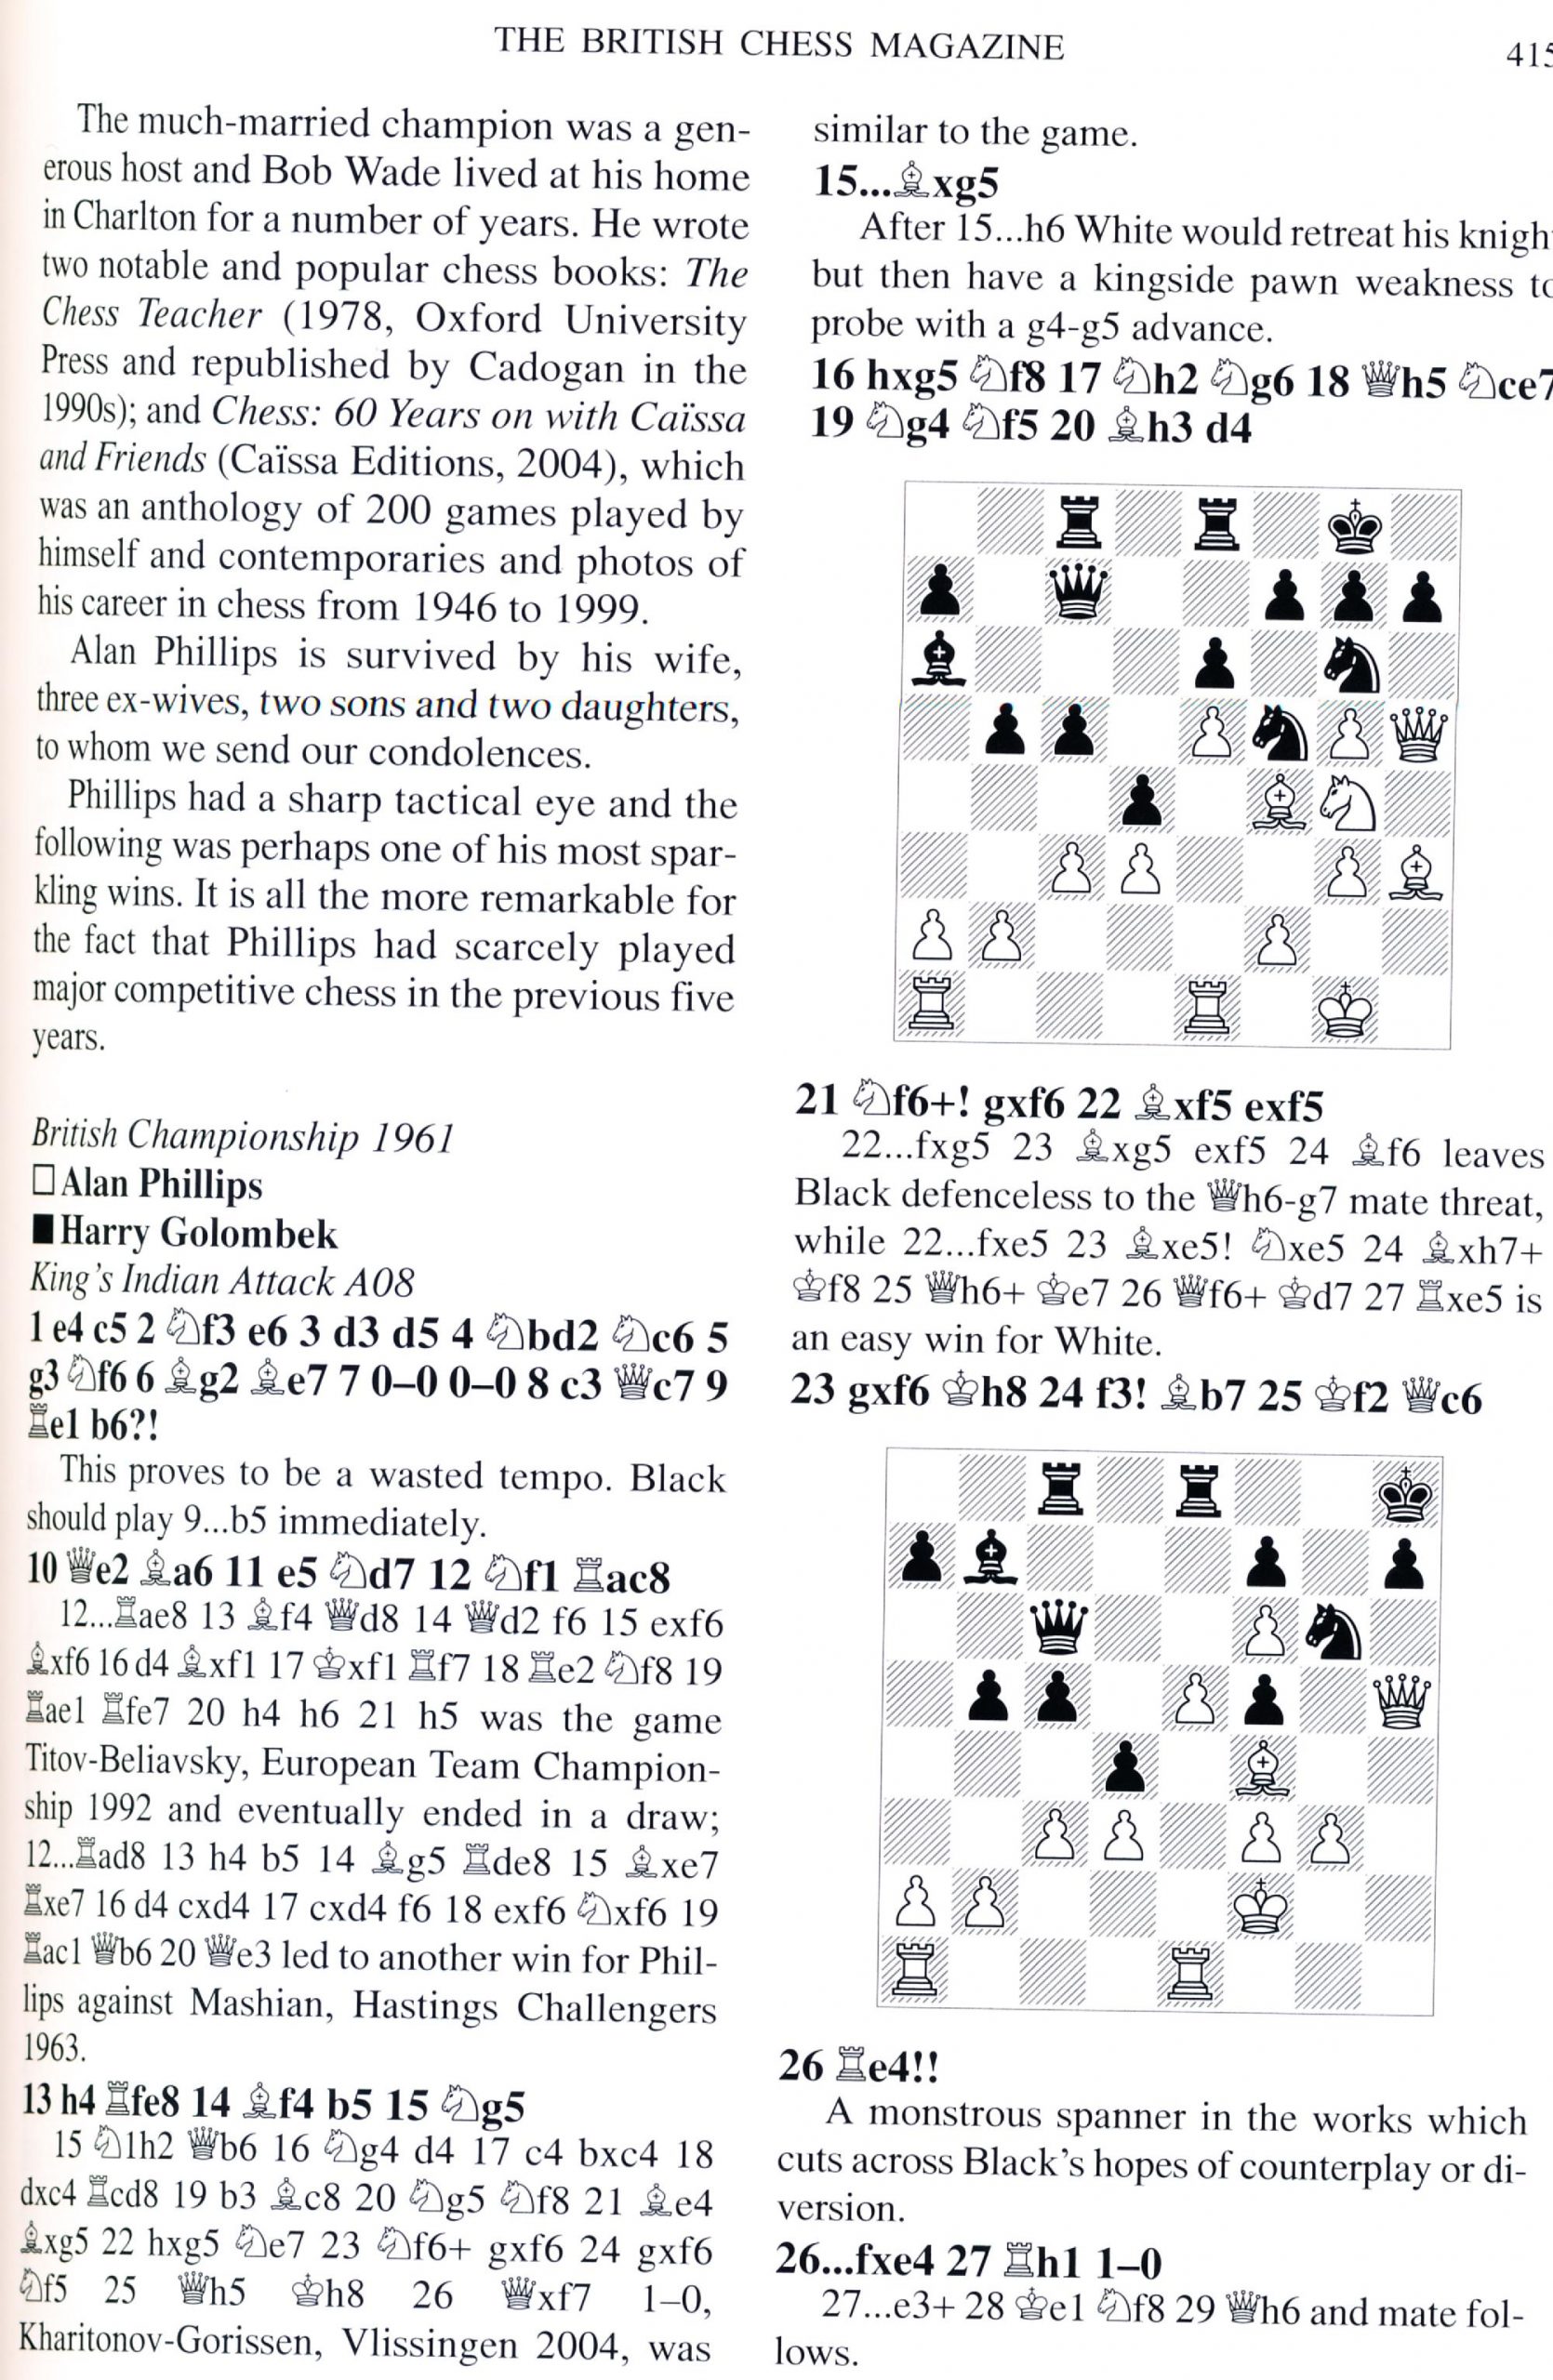 Obituary of Alan Phillips by John Saunders from British Chess Magazine, 2009. Part Two